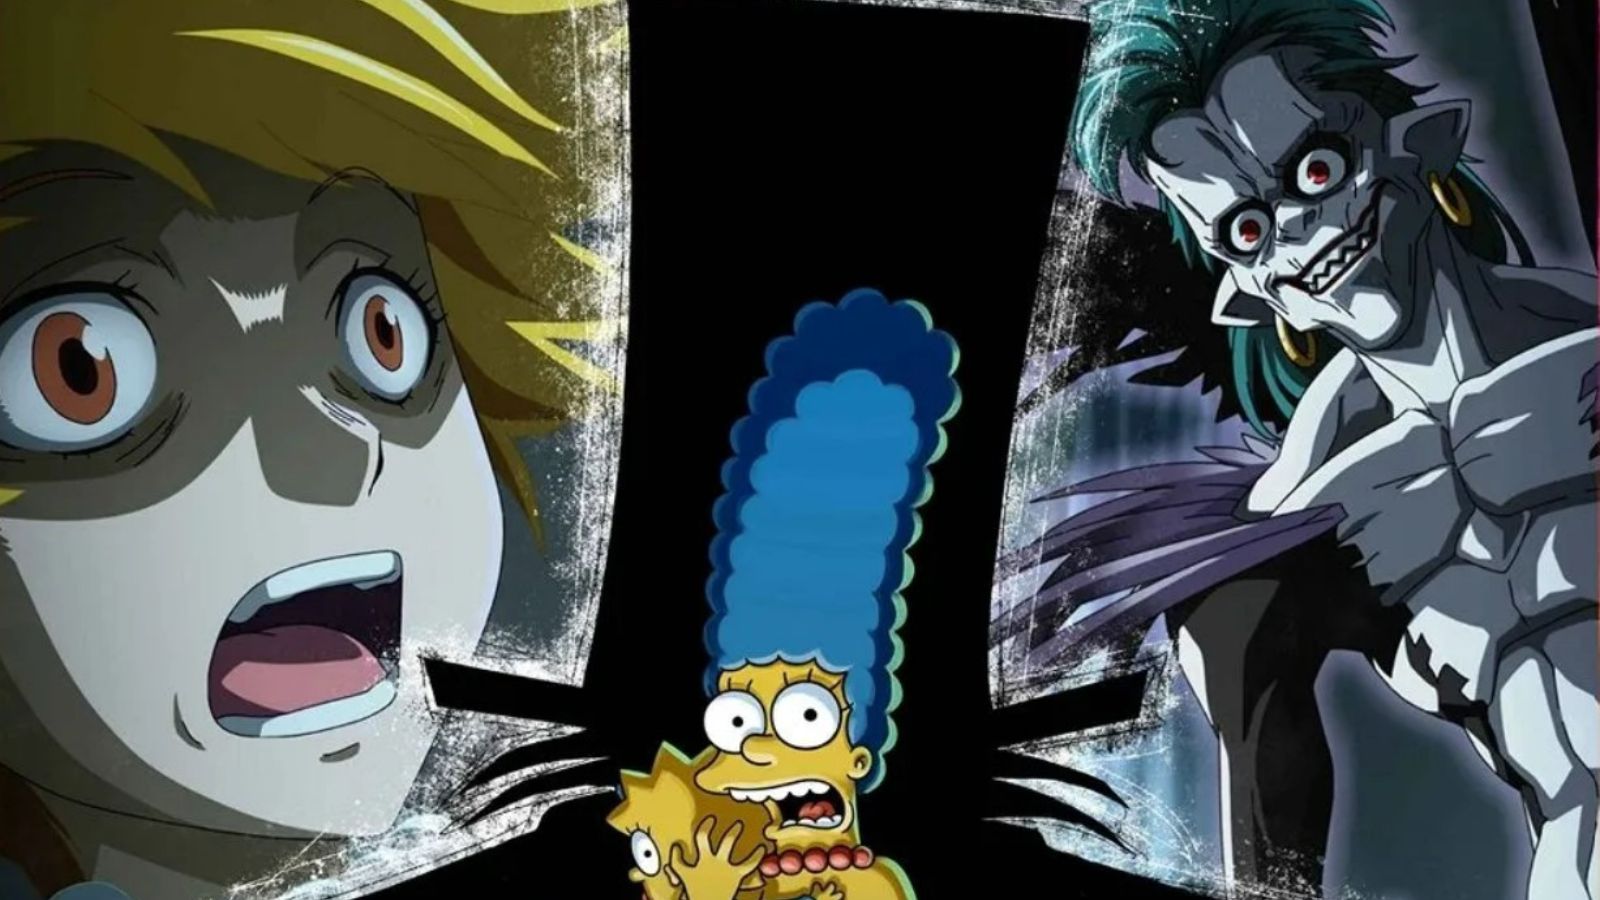 Unsurprisingly, ‘The Simpsons’ fans think 2022’s ‘Treehouse of Horror’ is the best one yet